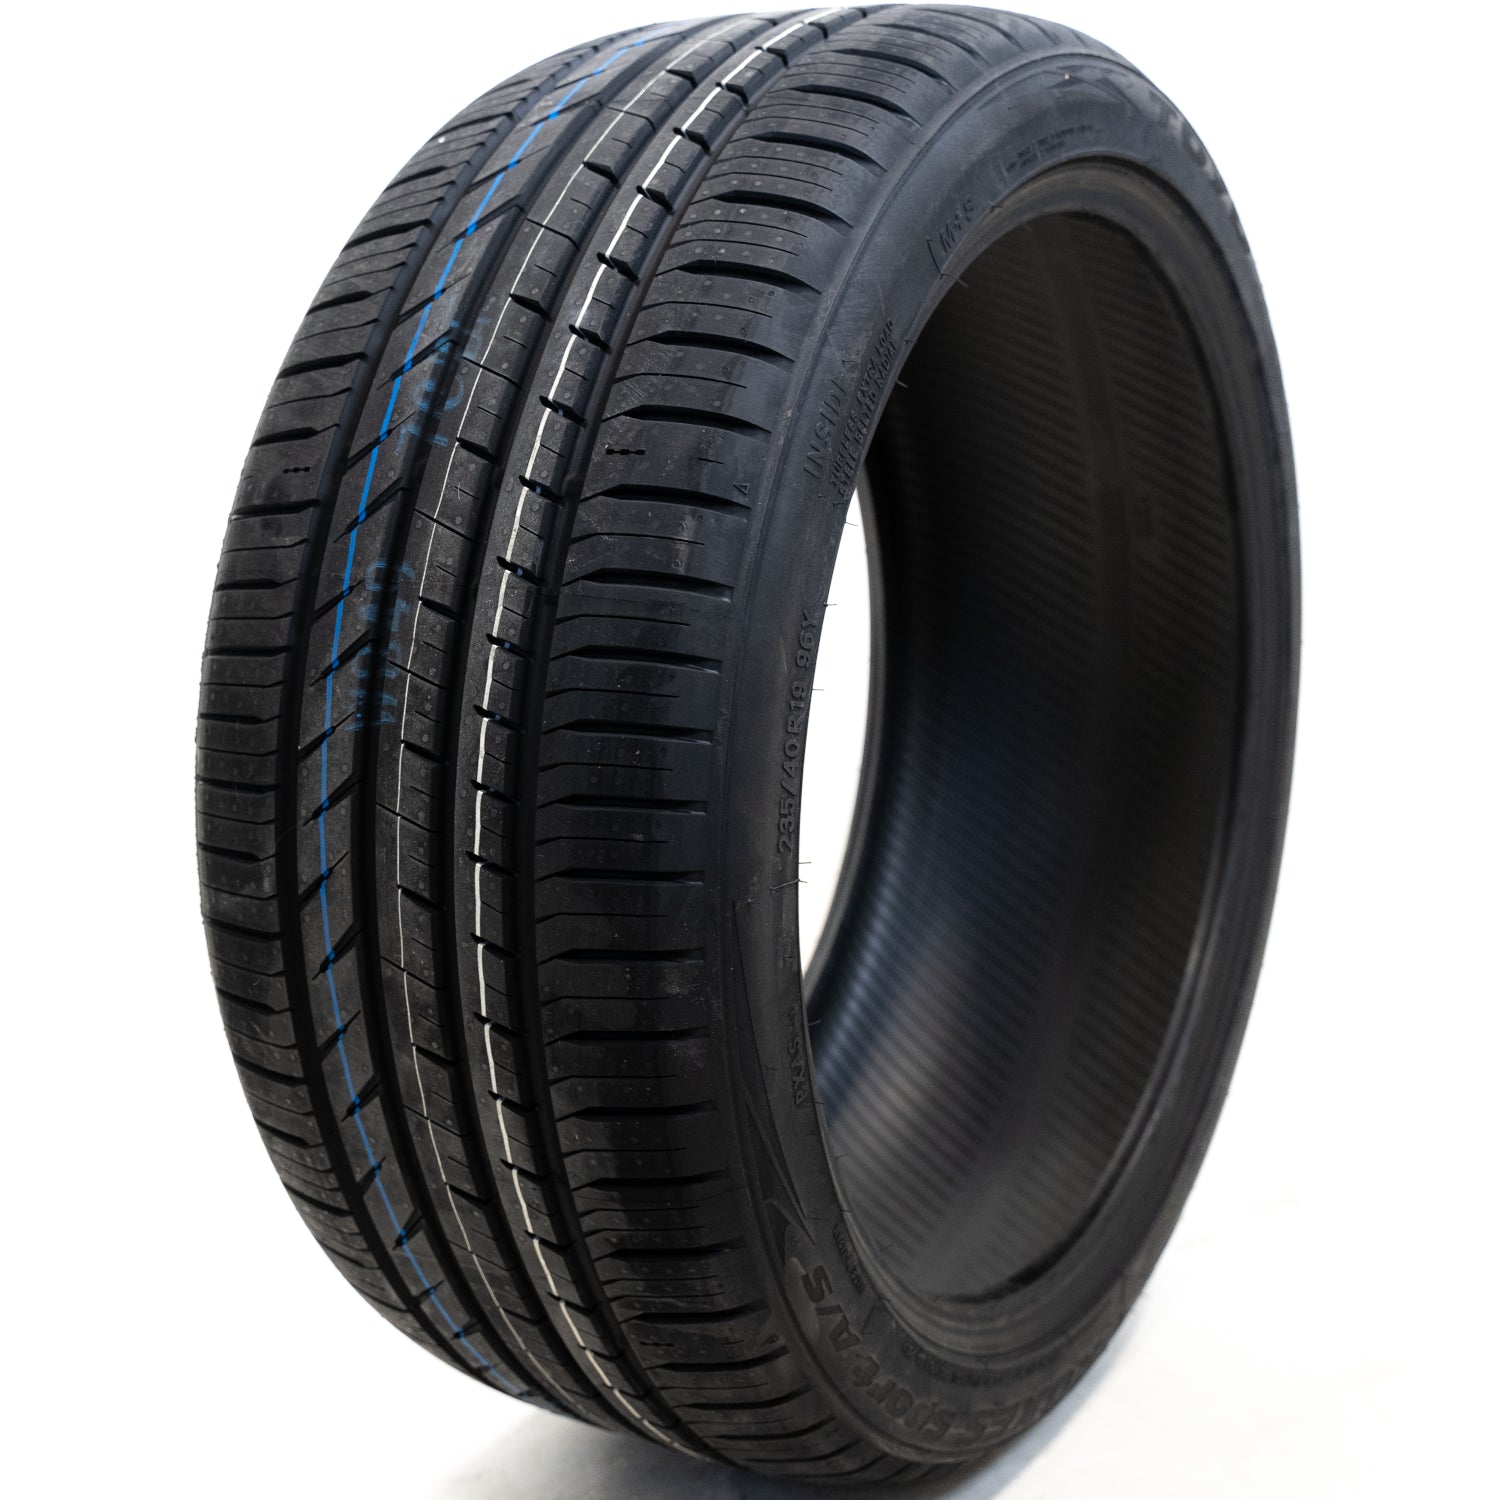 TOYO TIRES PROXES SPORT A/S 235/40R17XL (24.4X9.3R 17) Tires